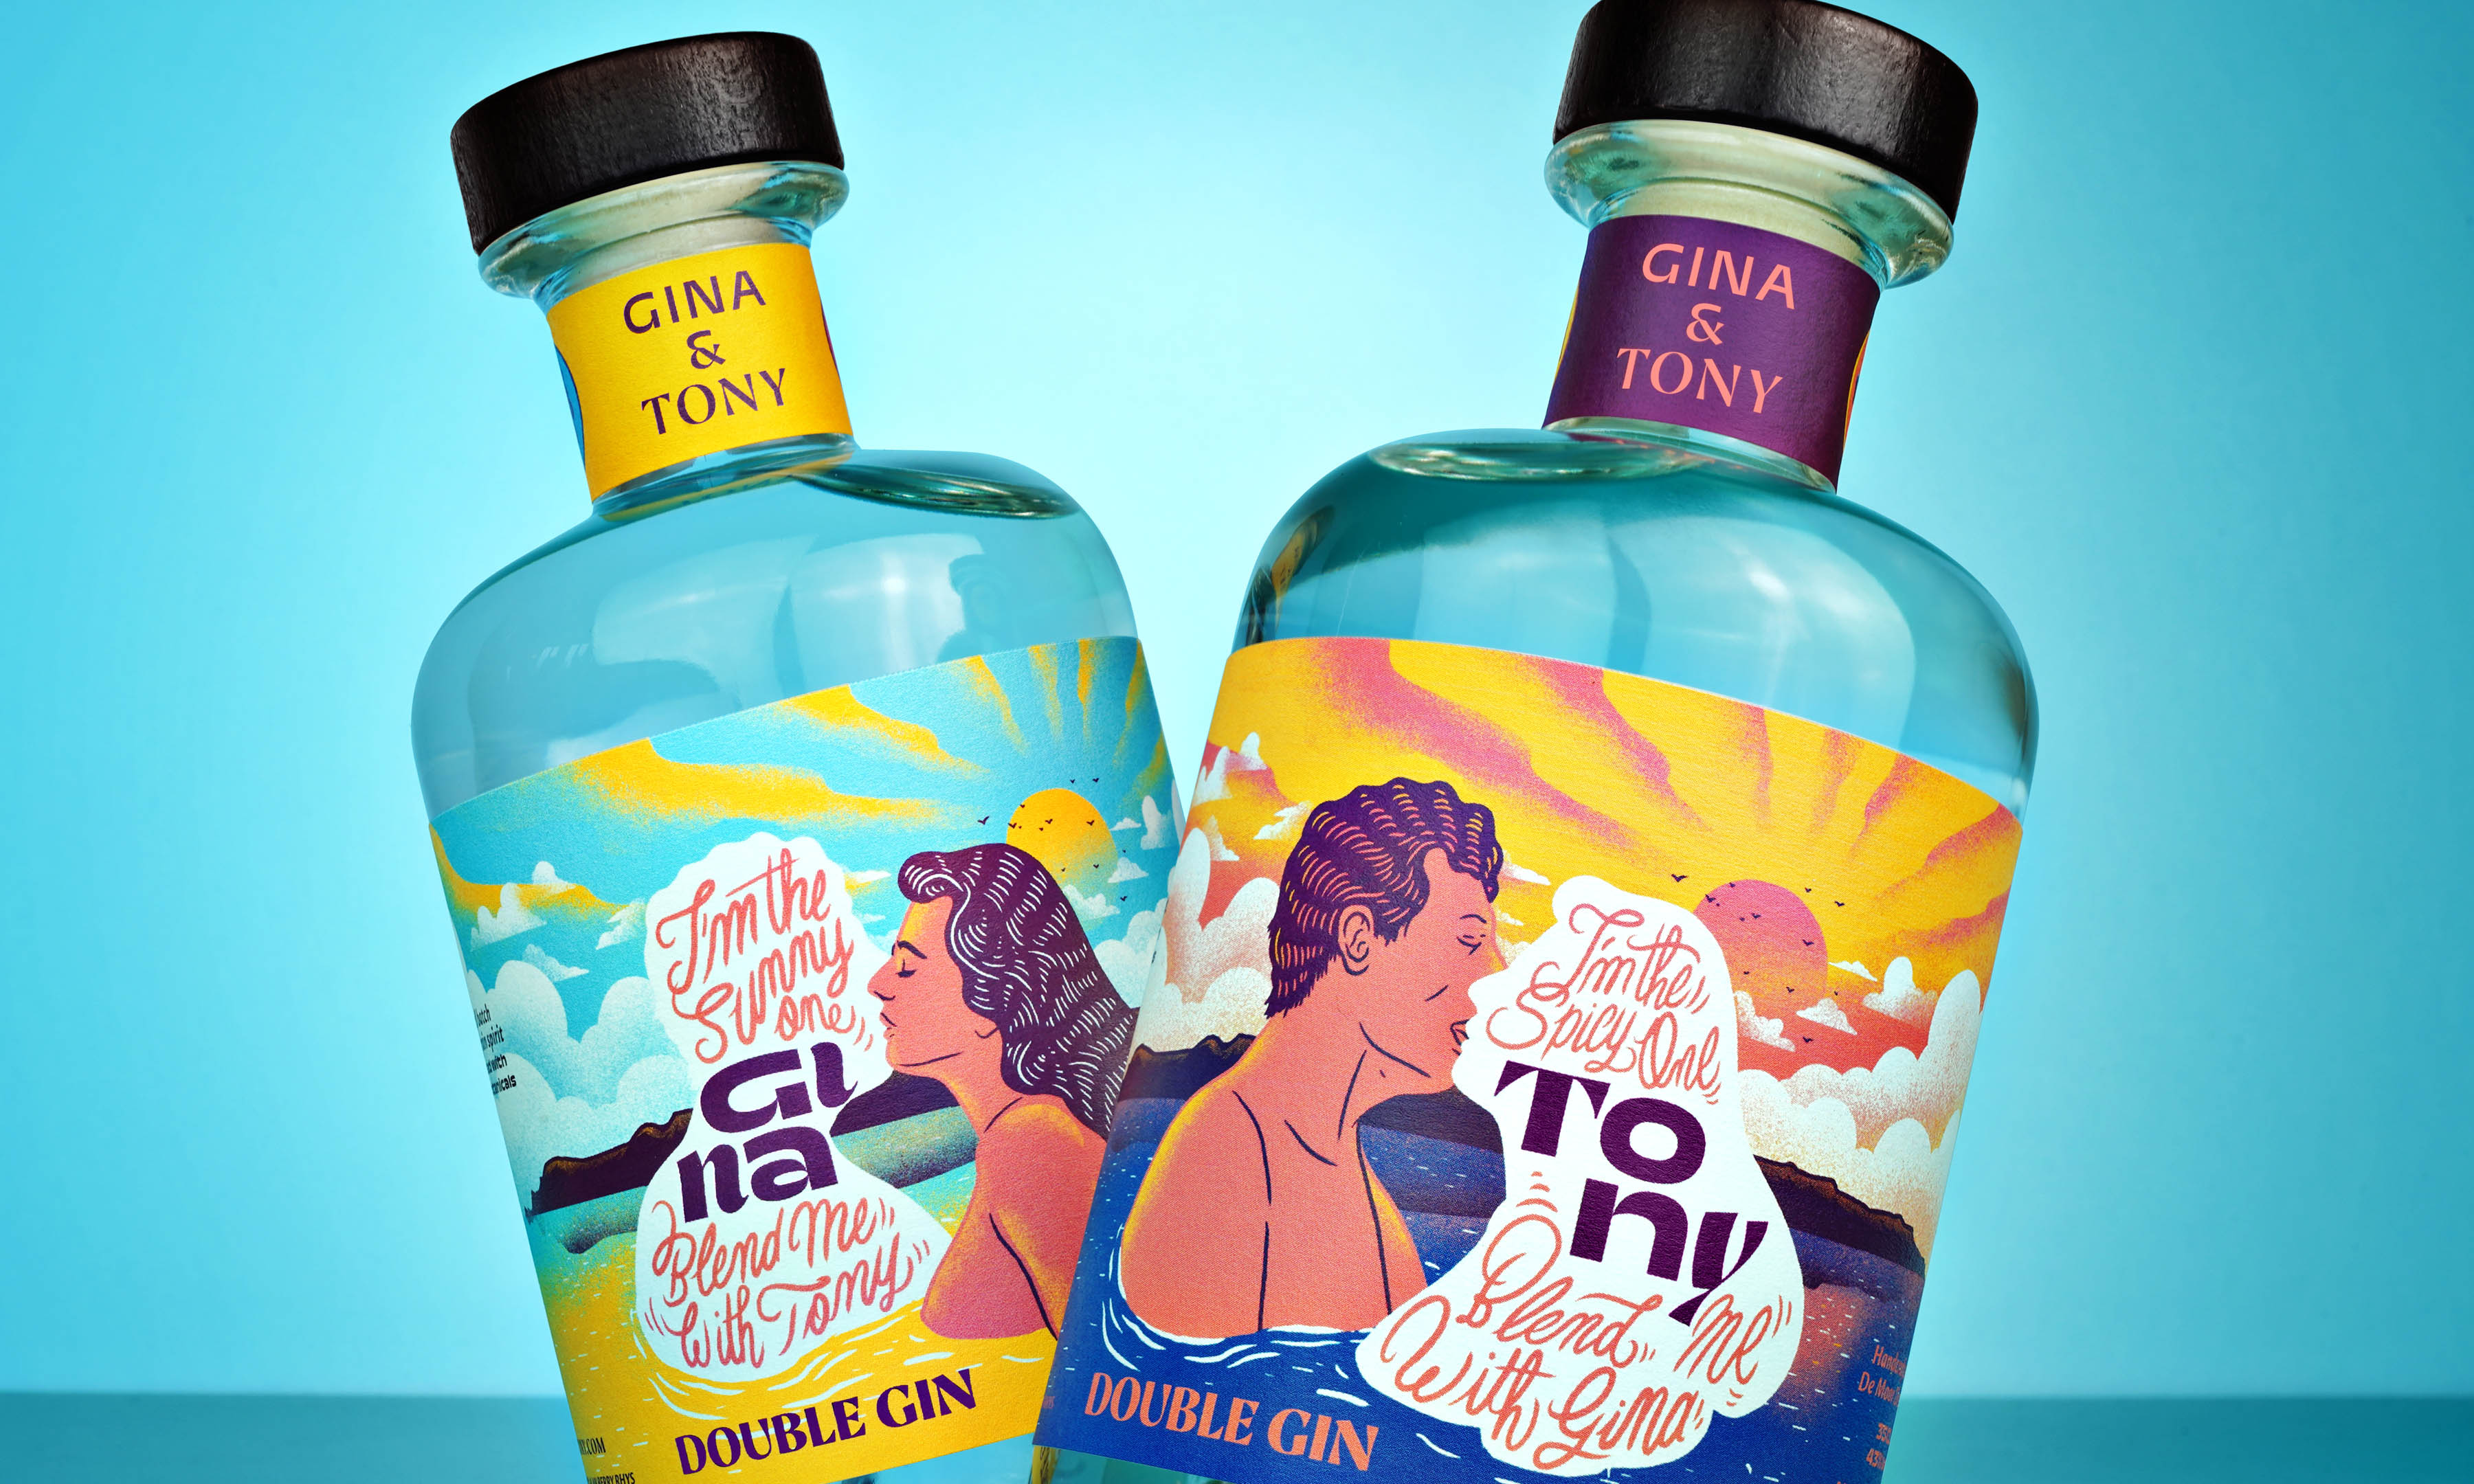 Meet Gina and Tony, a Mixology Love Story by Sign Brussels